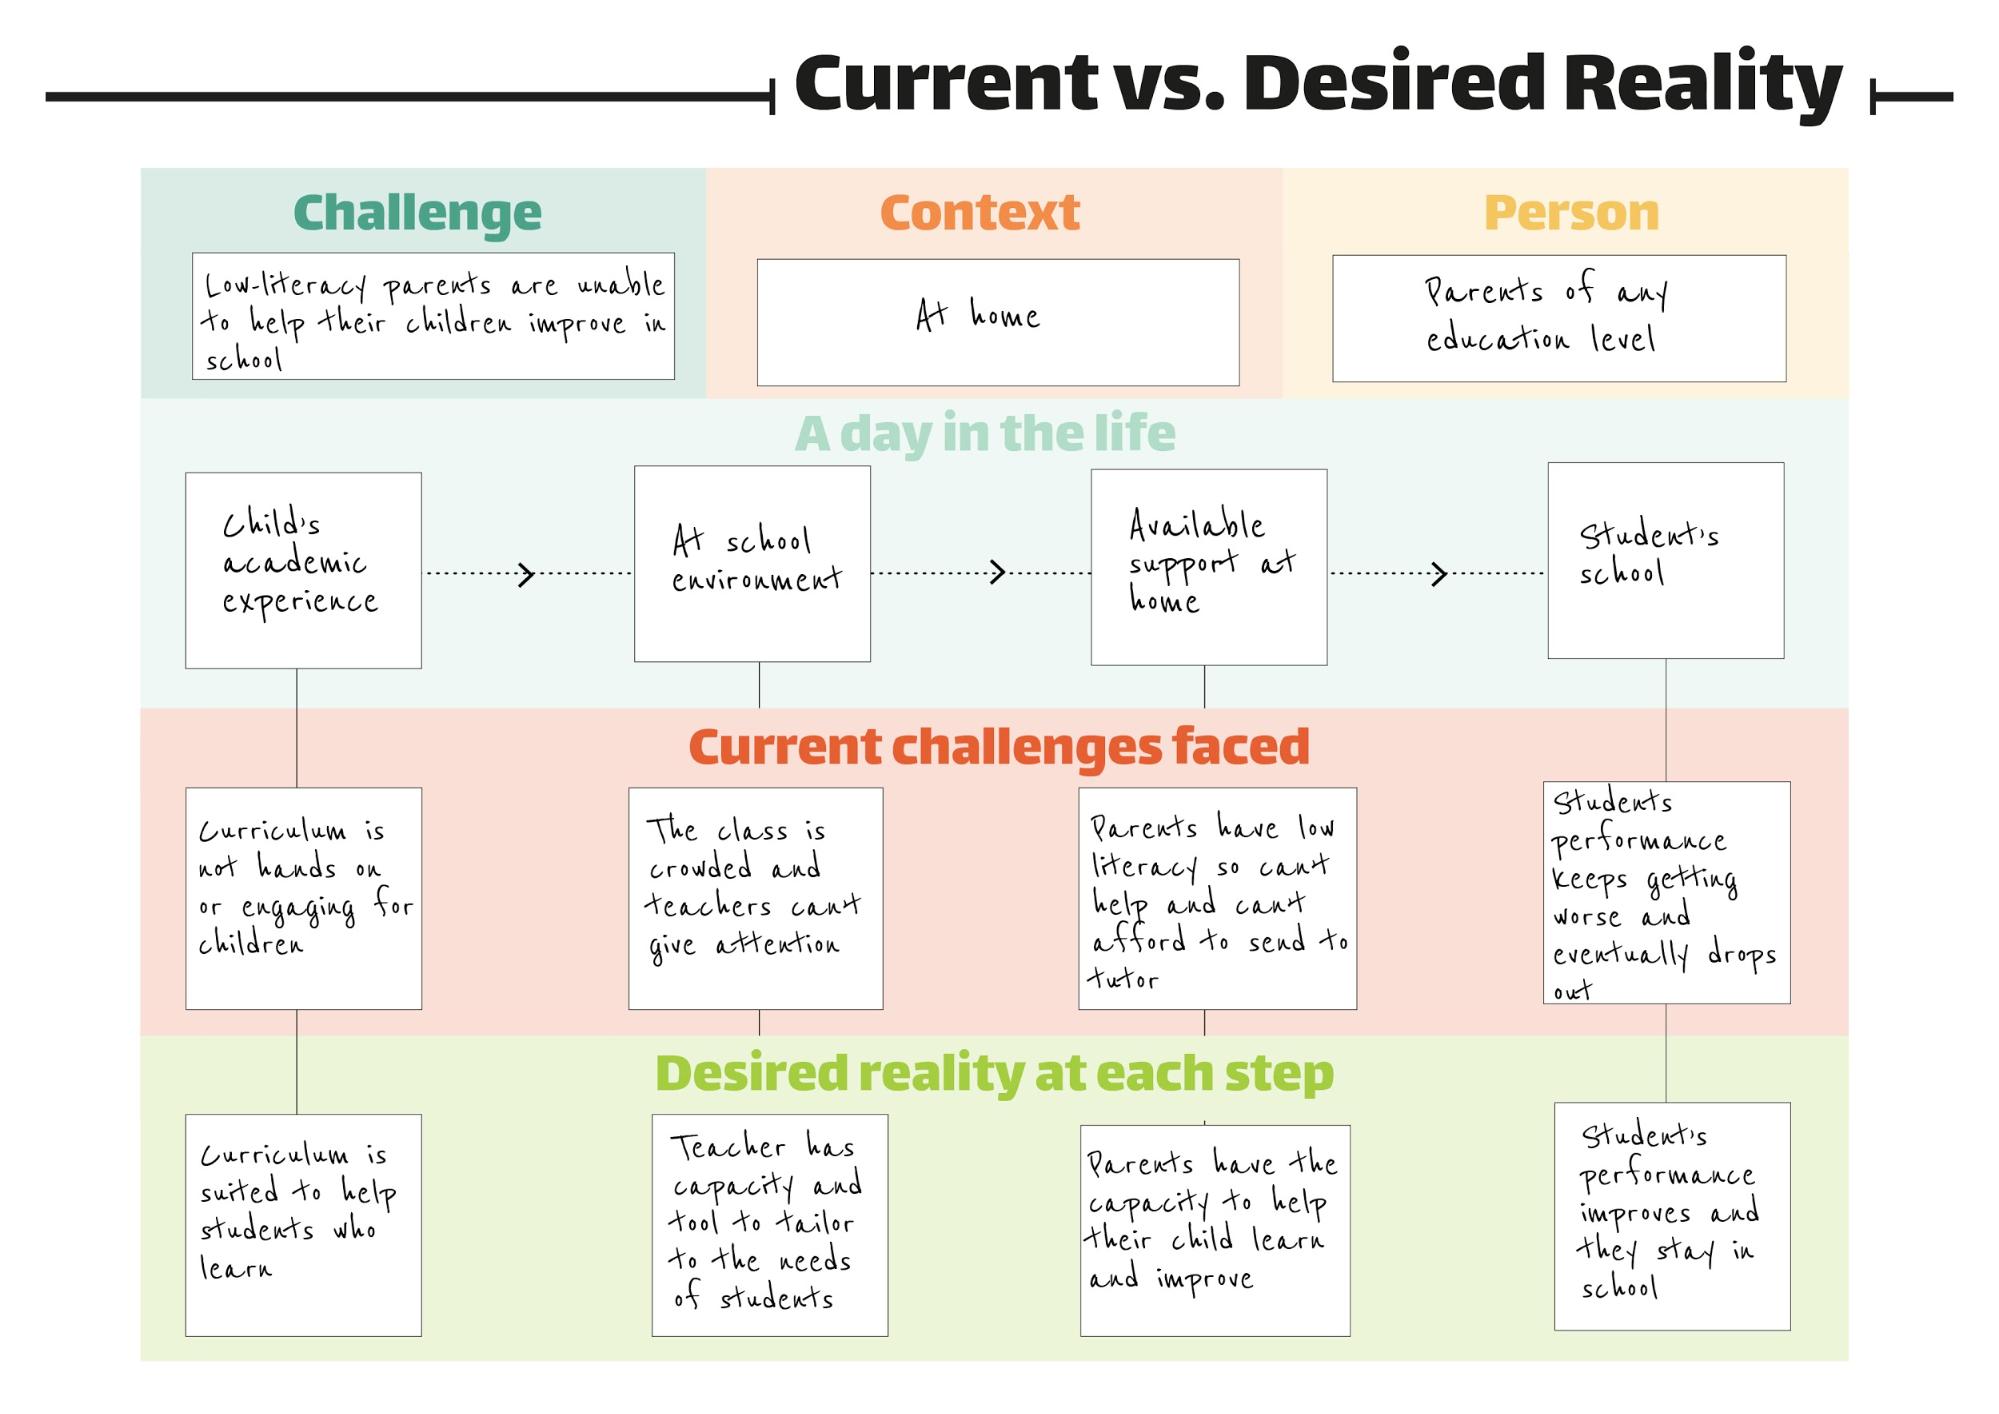 Current reality vs. desired reality image